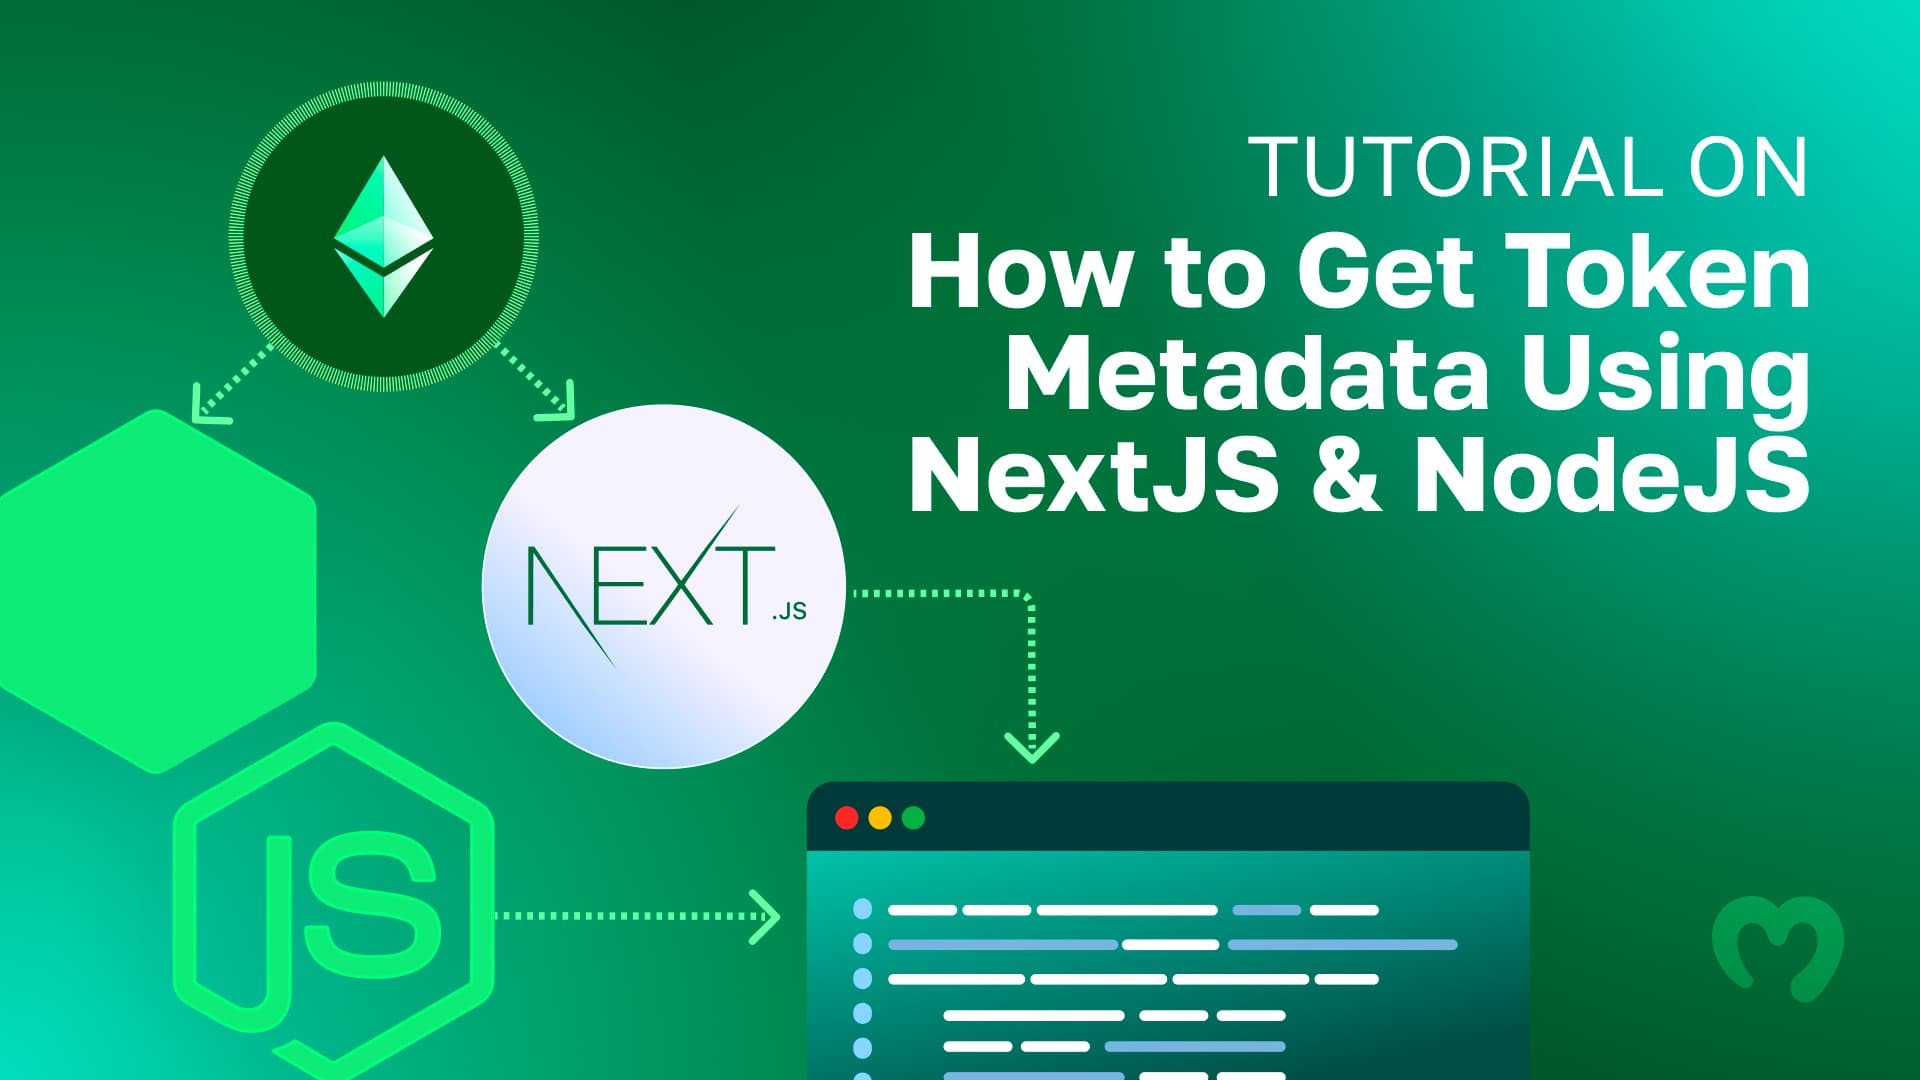 tutorial on how to get token metadata using nextjs and nodejs title on a green background with a code editor and various symbols in the background